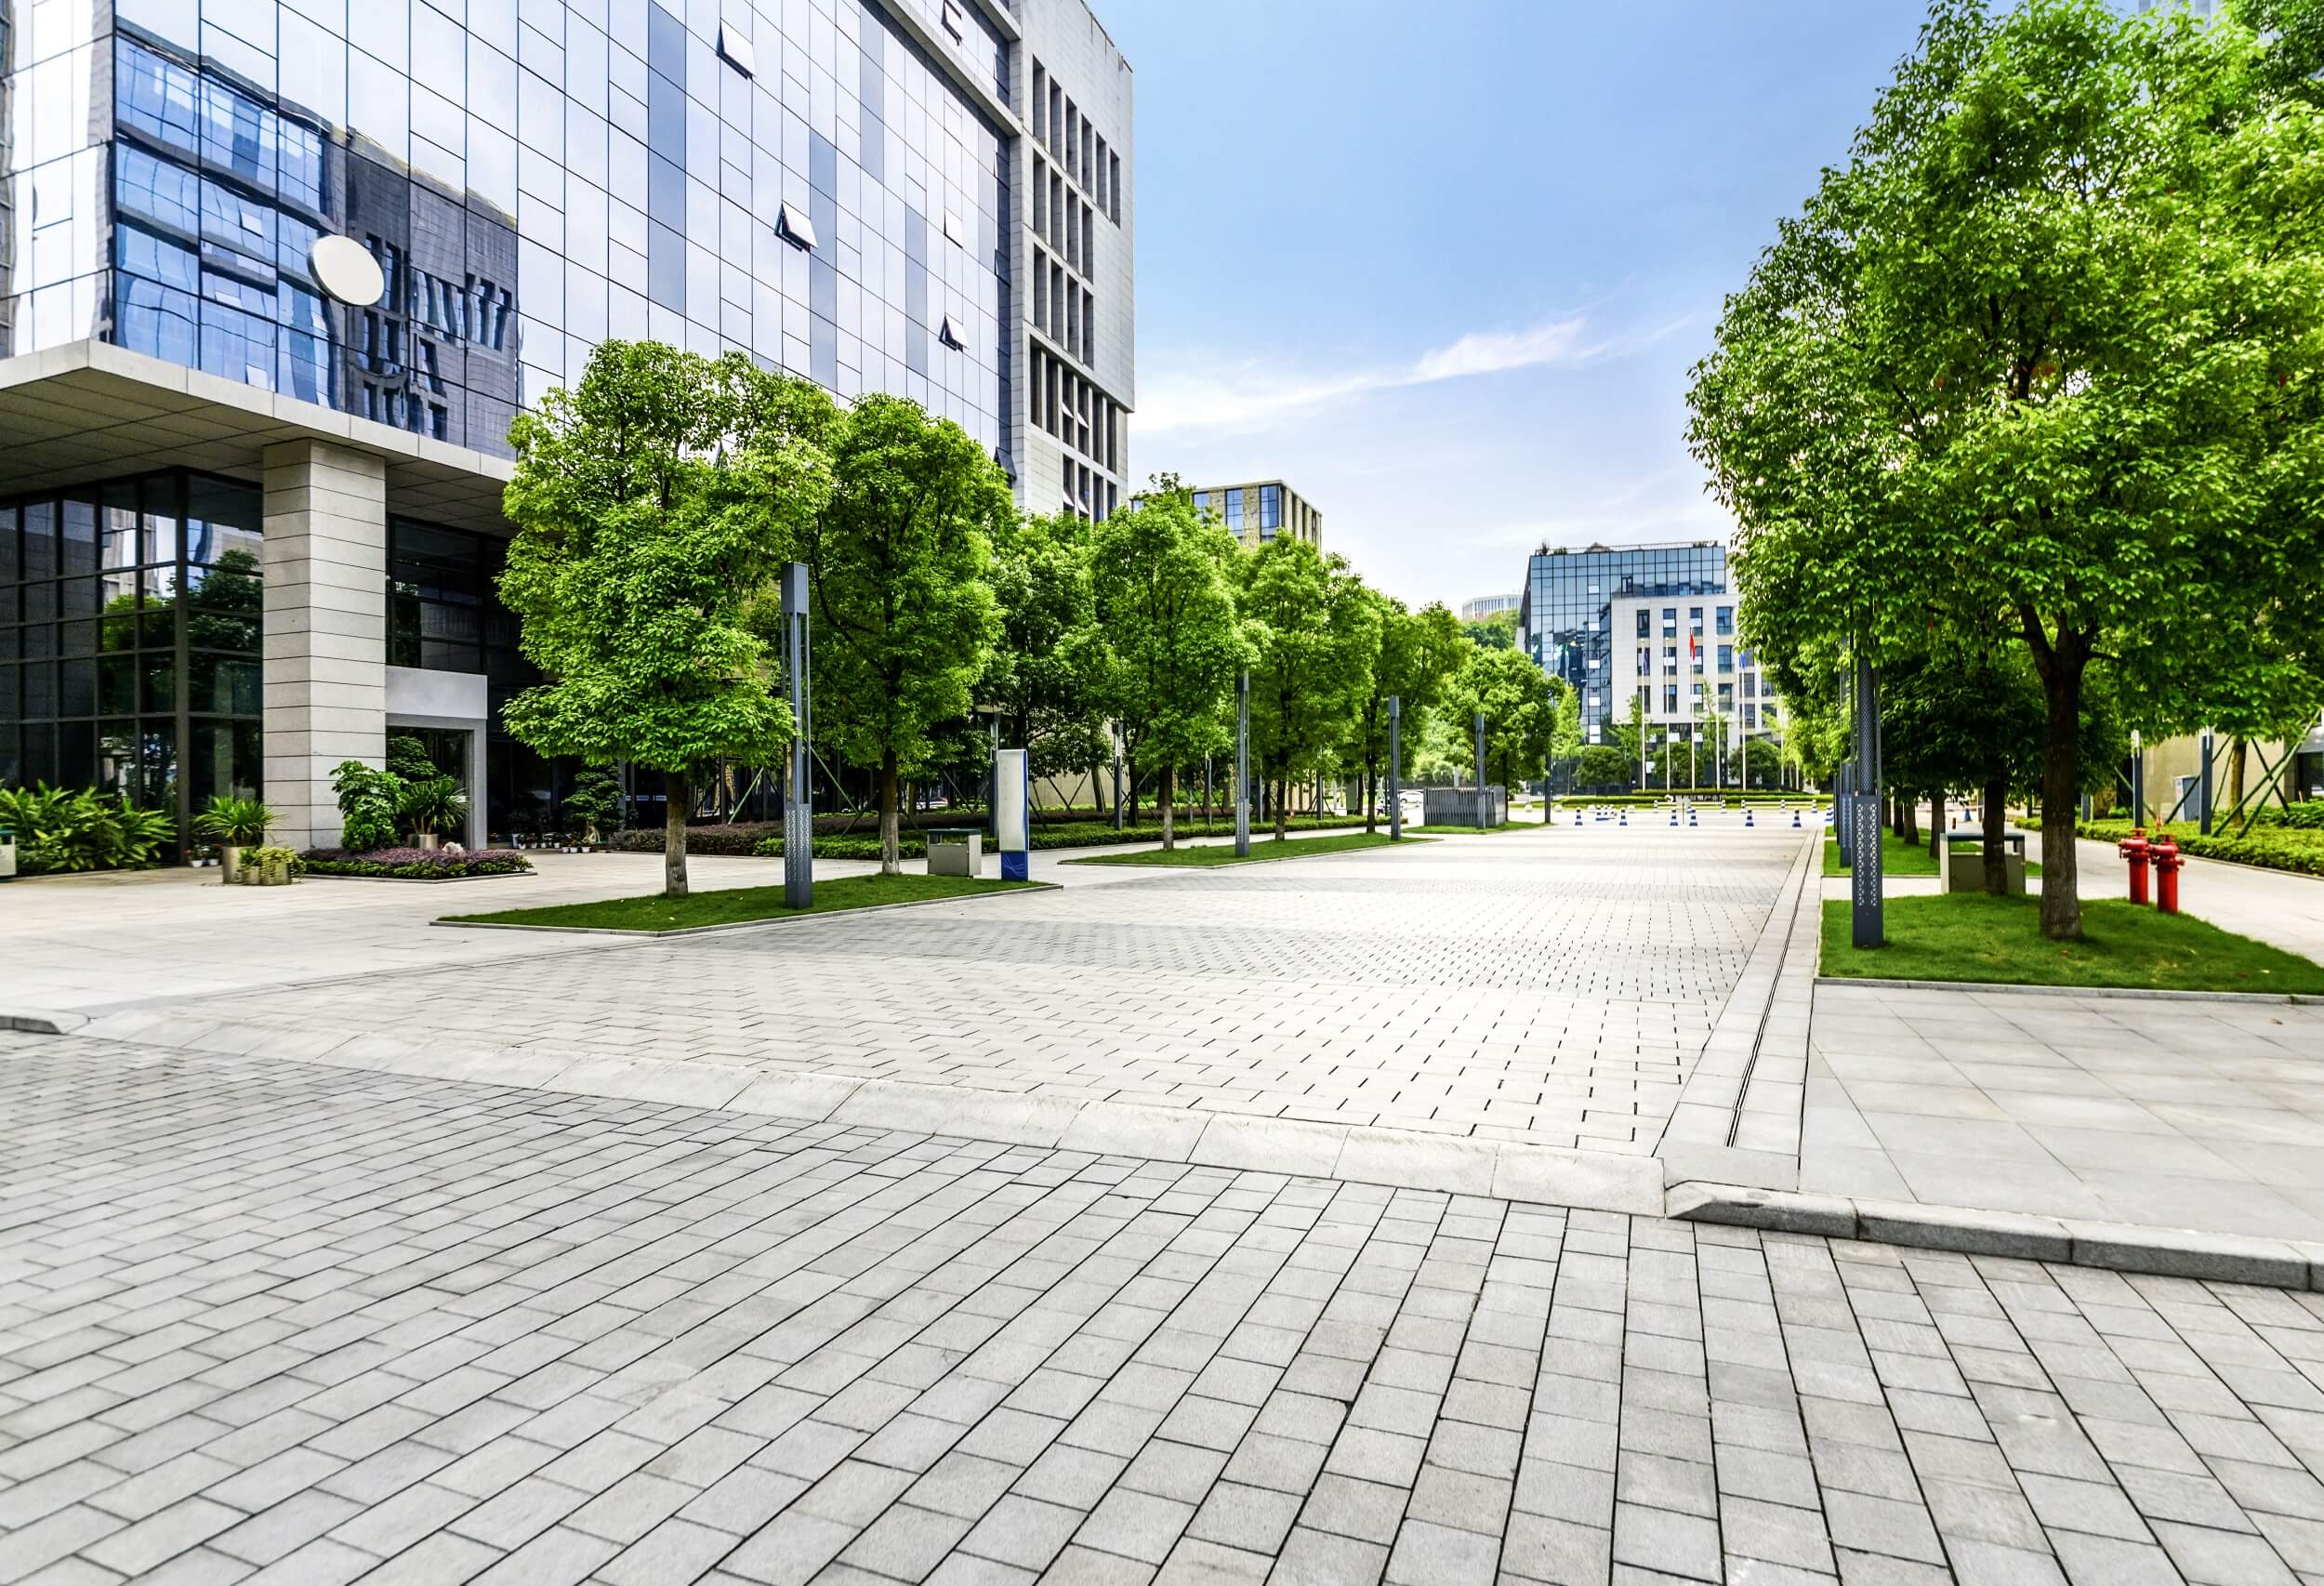 Trees and green space outside a modern building